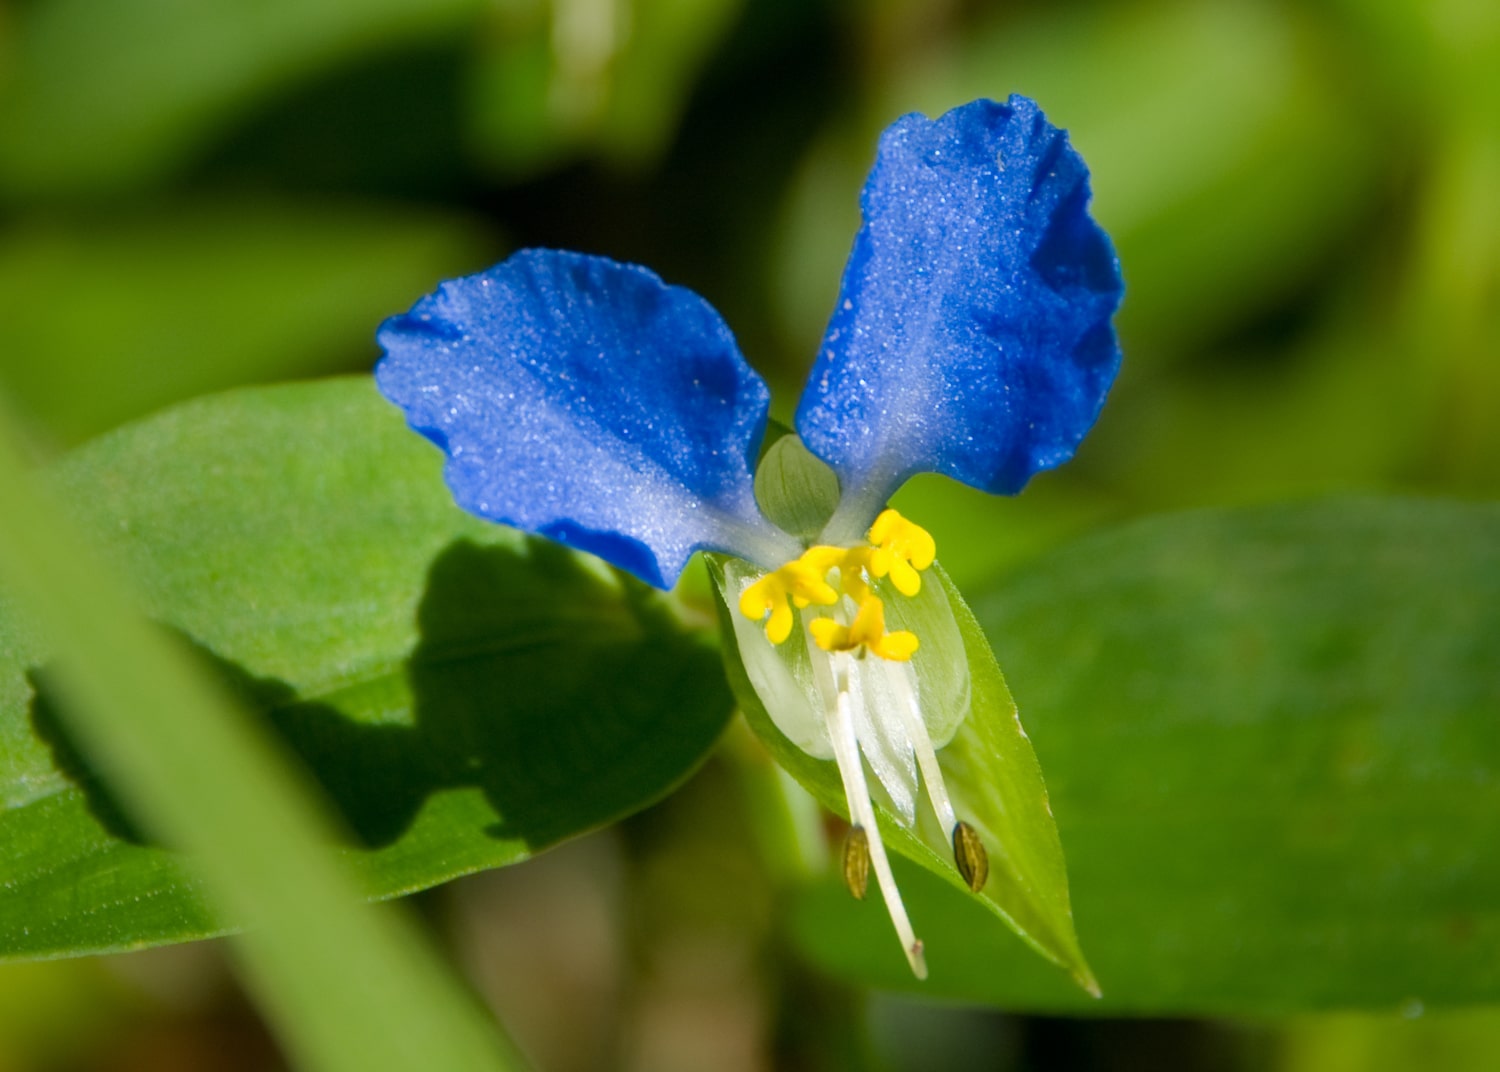 a flower with two bright blue round petals and a small curling white petal. with foliage and stalks in the background